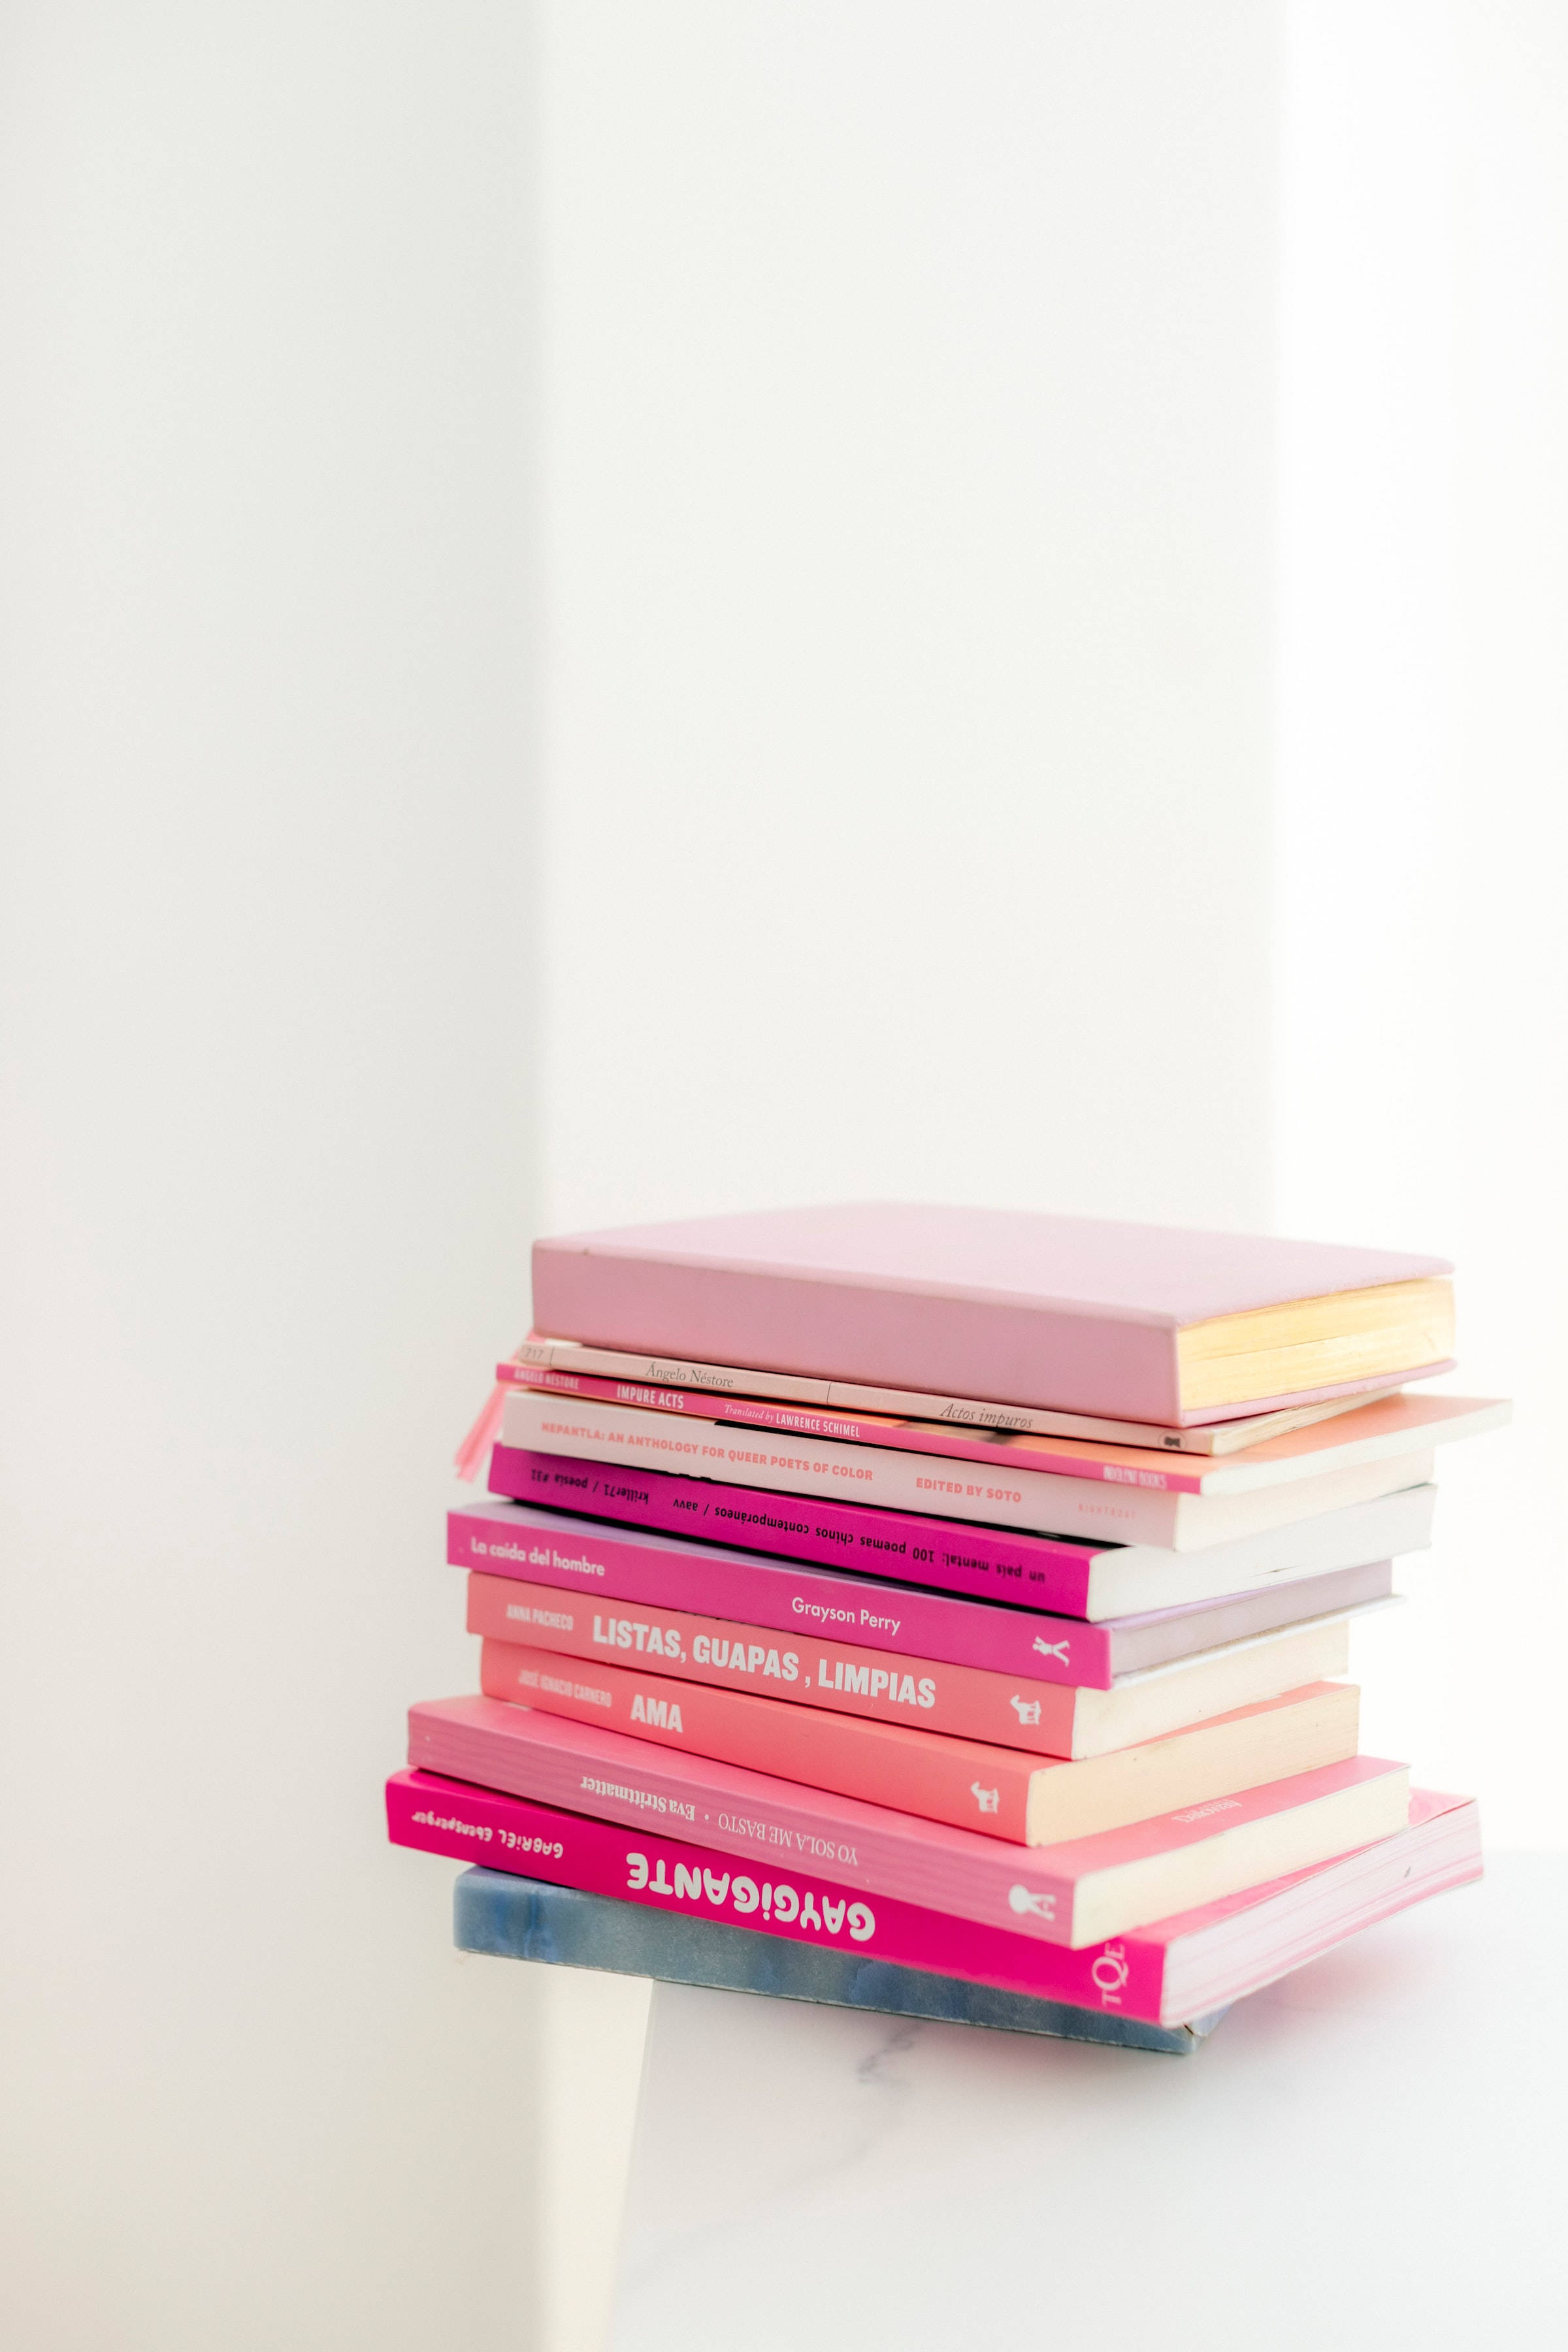 Download Cute Pink Aesthetic Pile Of Books Wallpaper